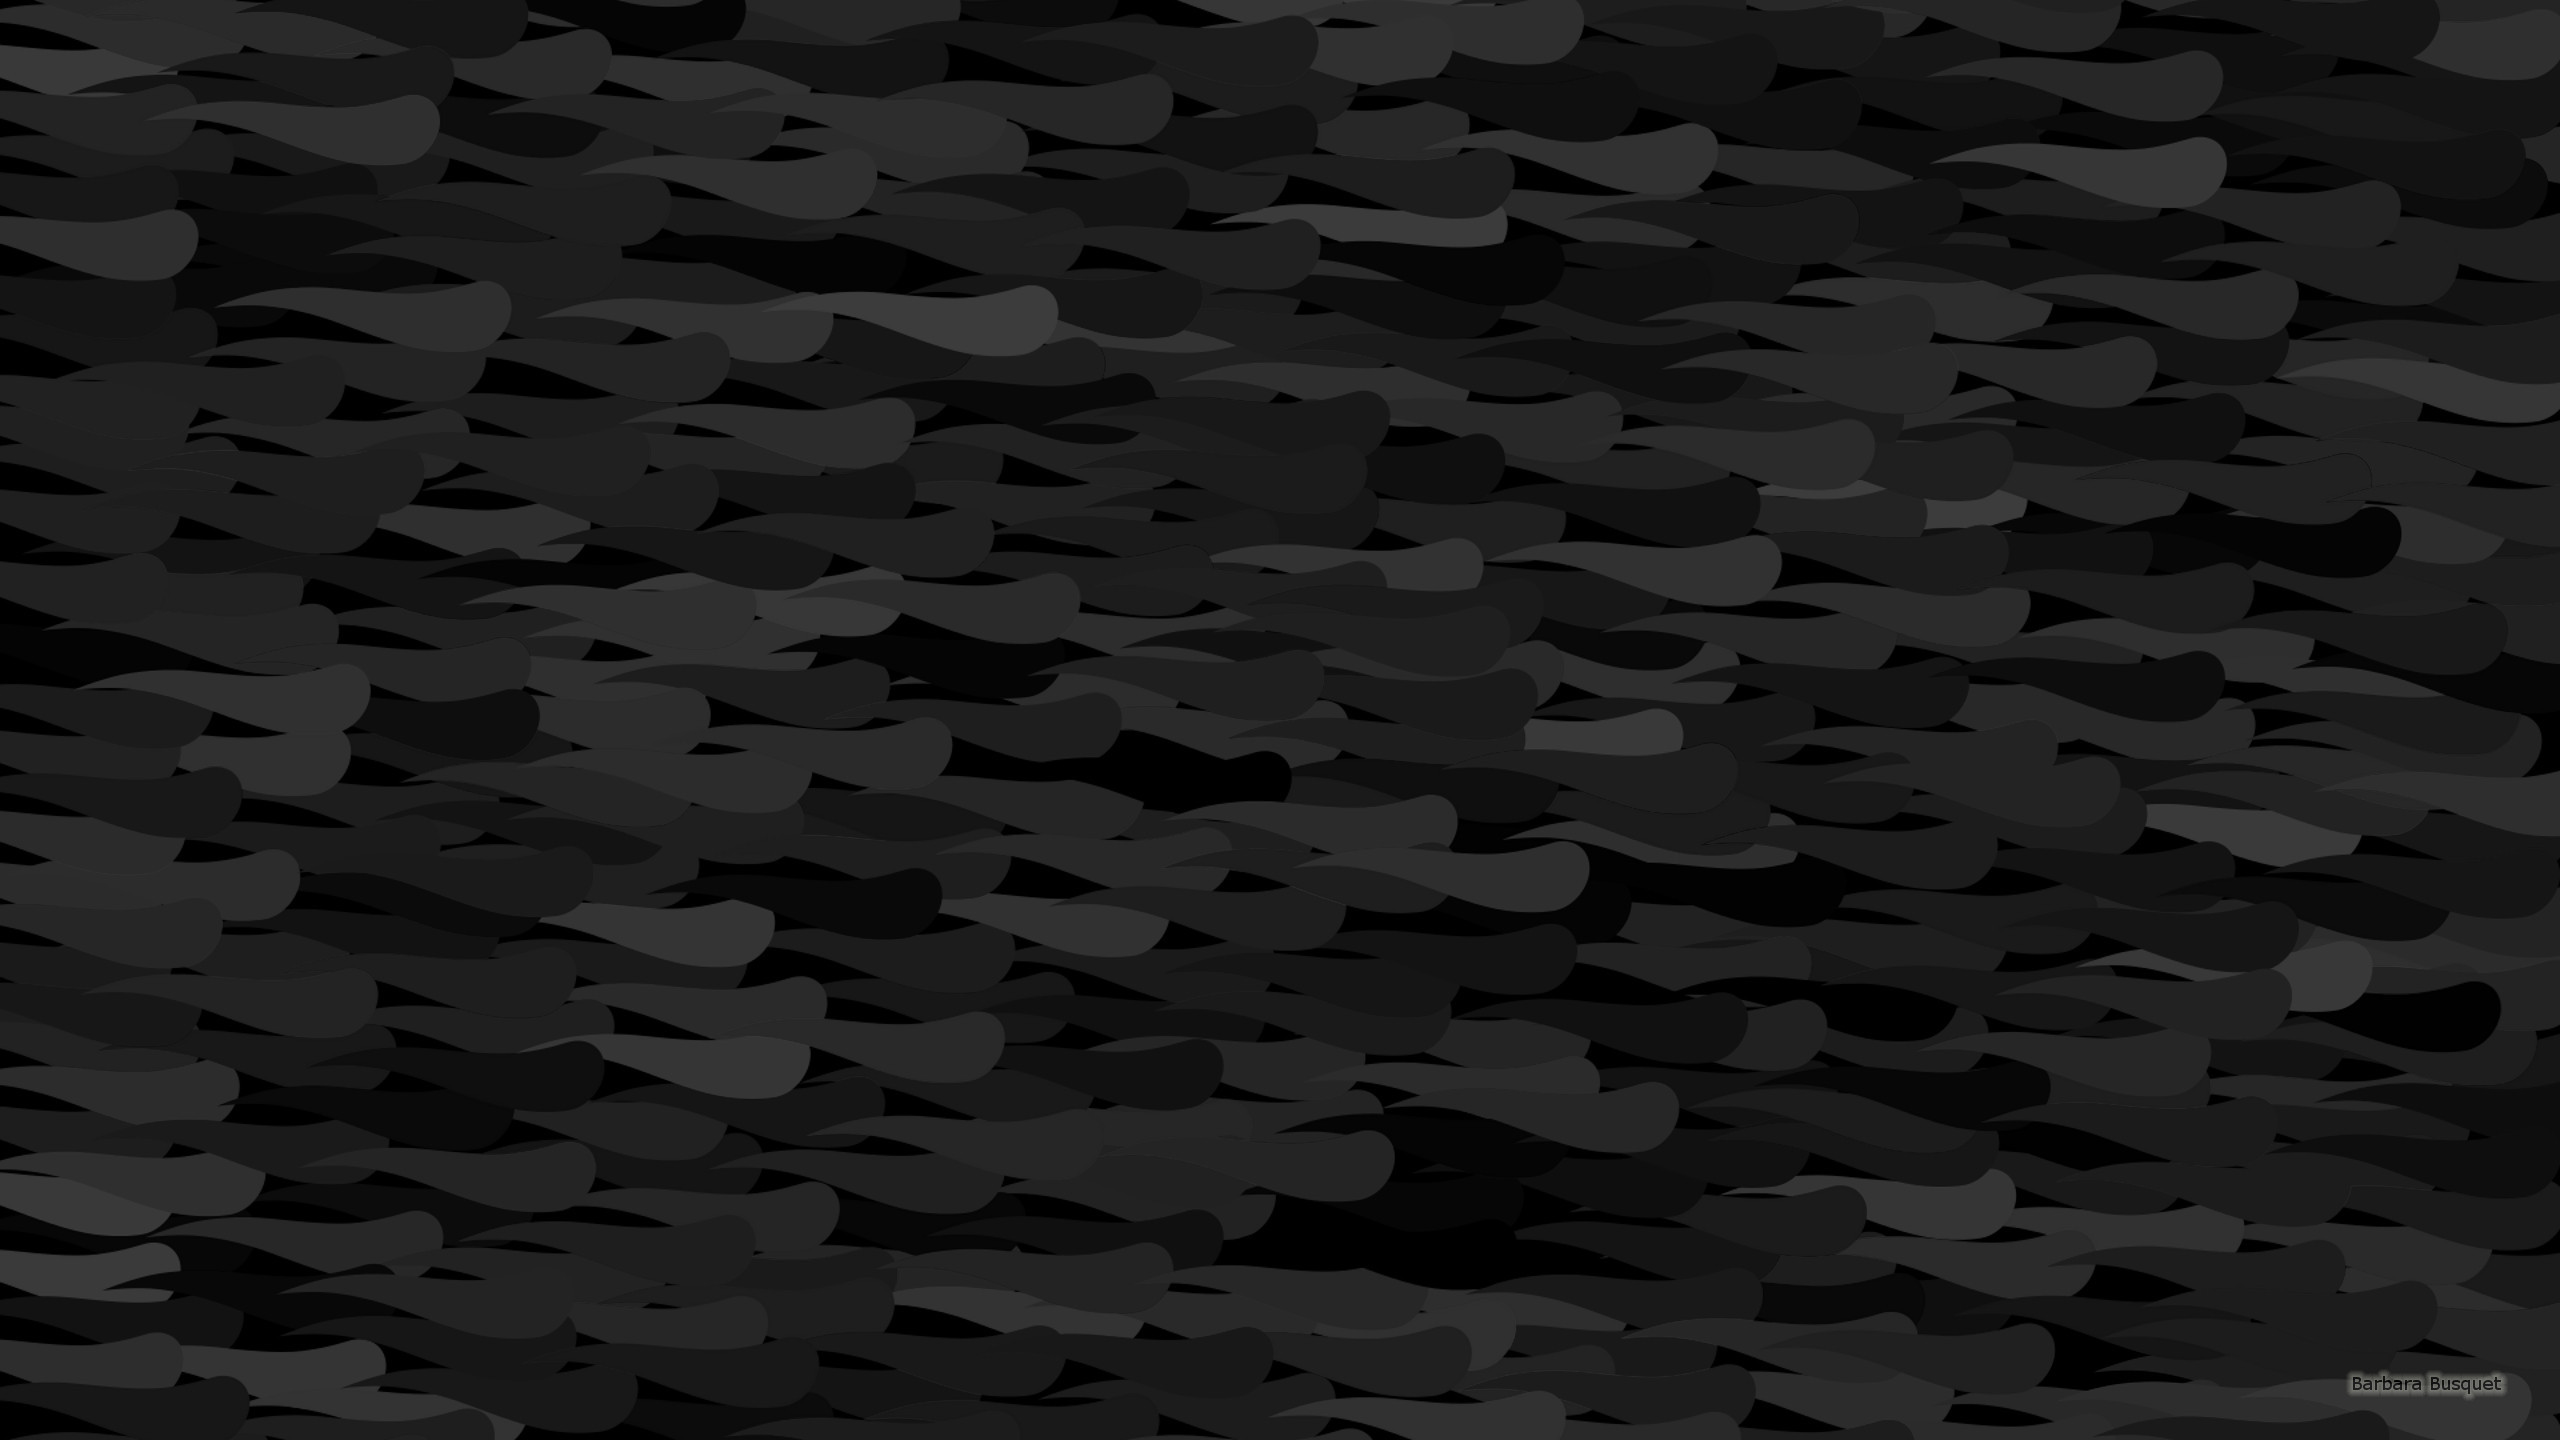 2560x1440 Black abstract wallpaper with dark gray shapes.